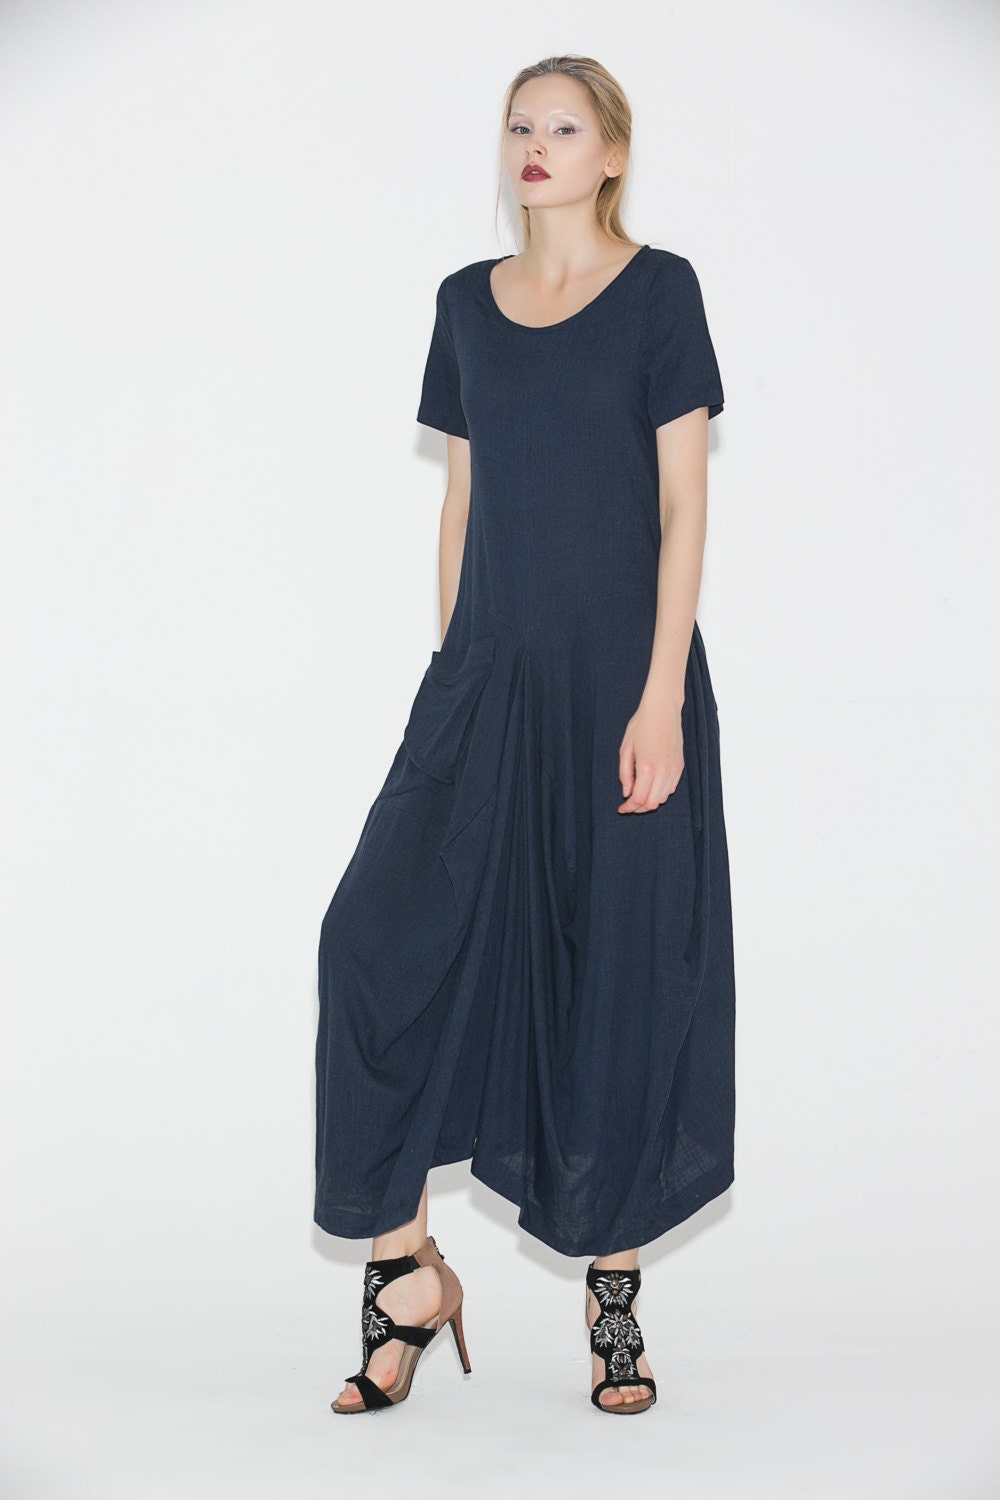 Navy blue linen dress Casual Chic Summer Loose-Fitting Plus